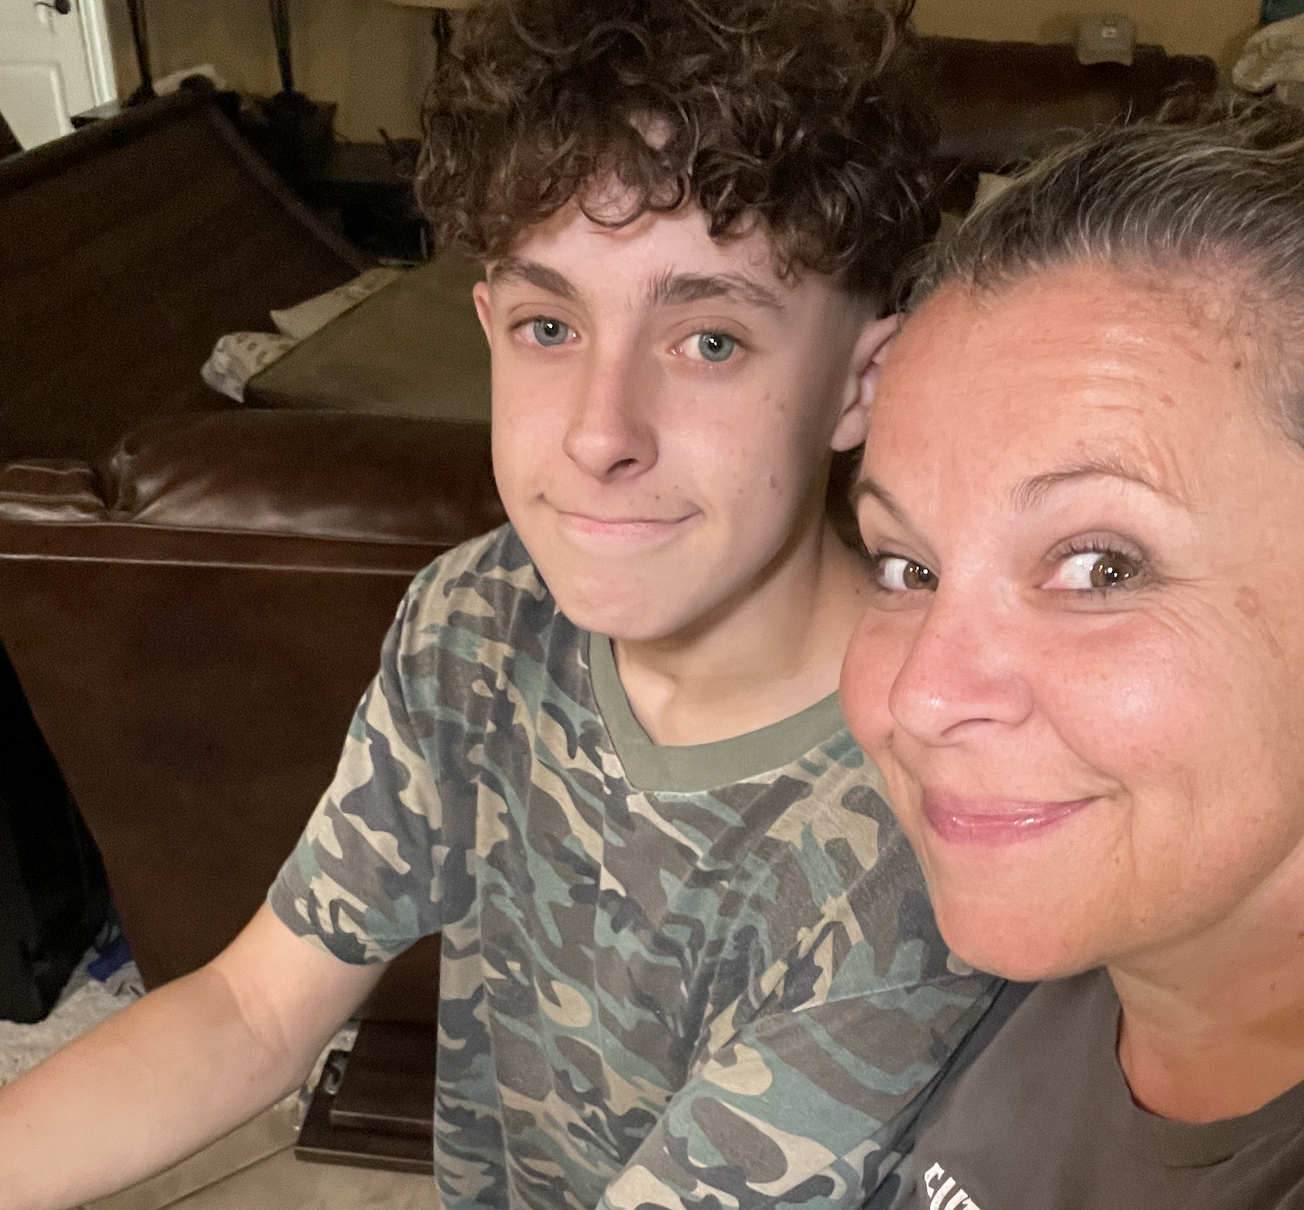 Image of a teenage boy in a camouflage t-shirt, smiling without showing teeth. Also pictured, sitting next to him, his mom, also smiling with no teeth.